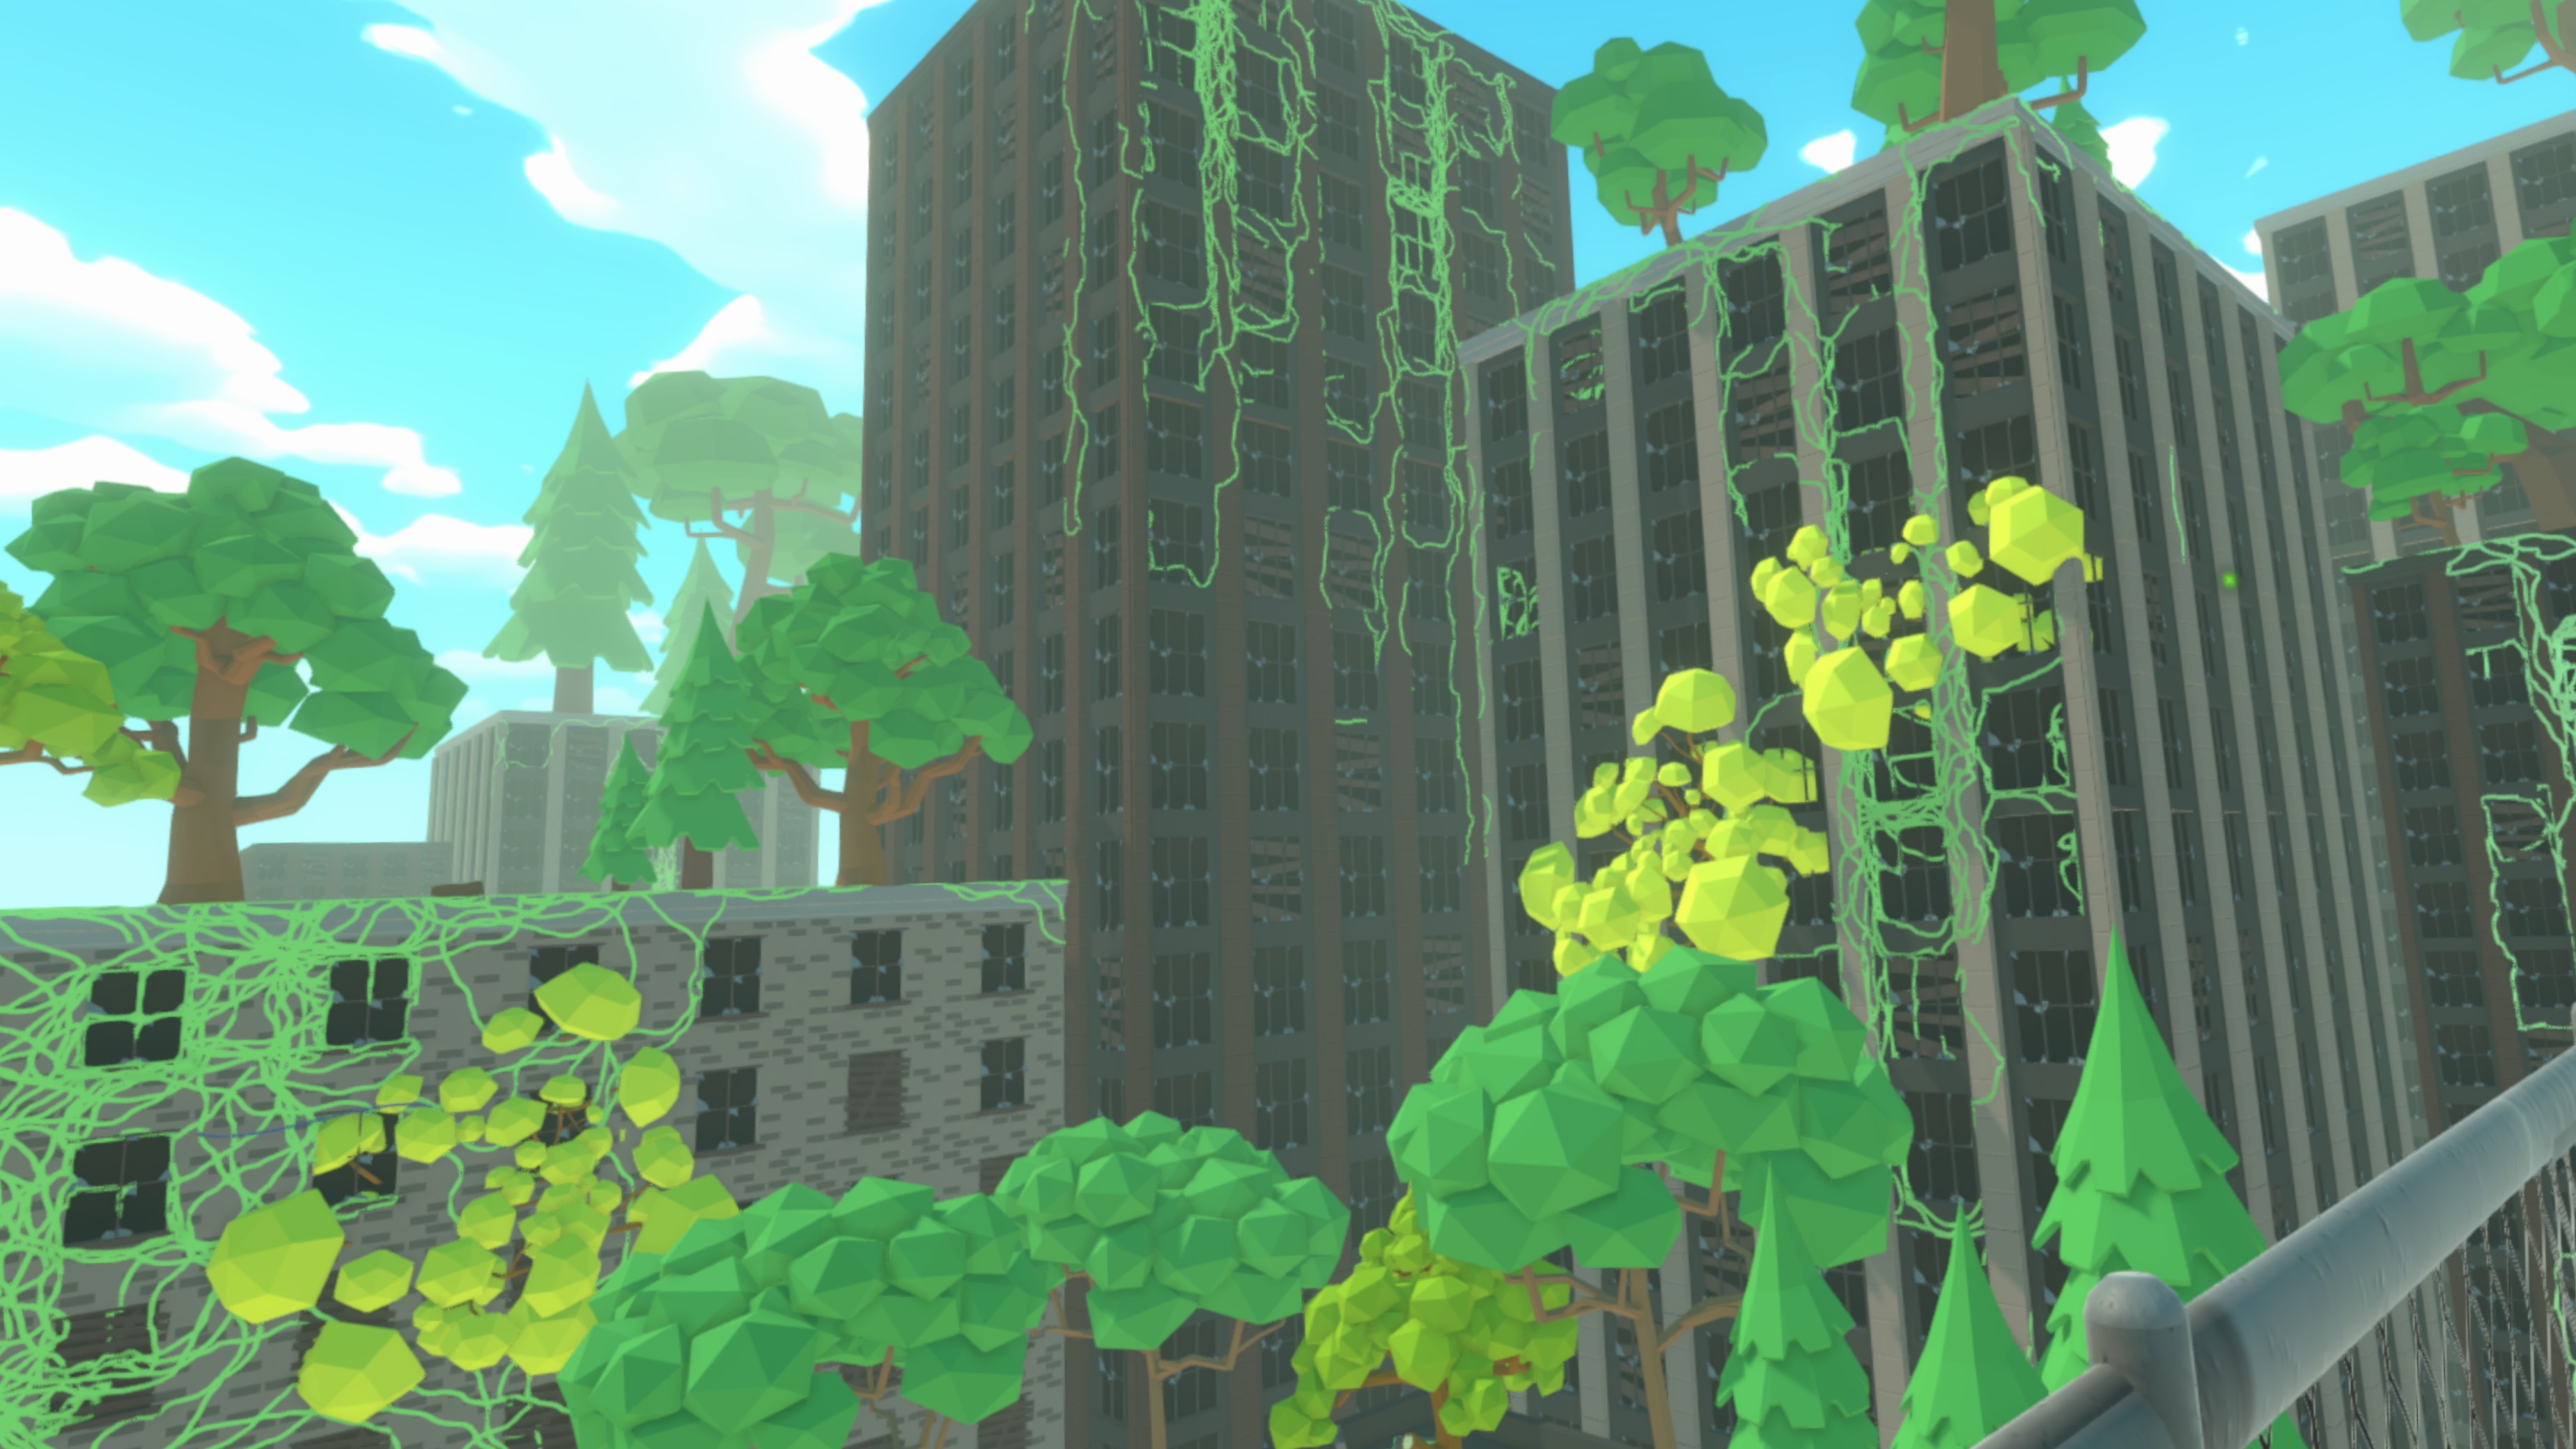 A screenshot of the city, covered in lush greenery.